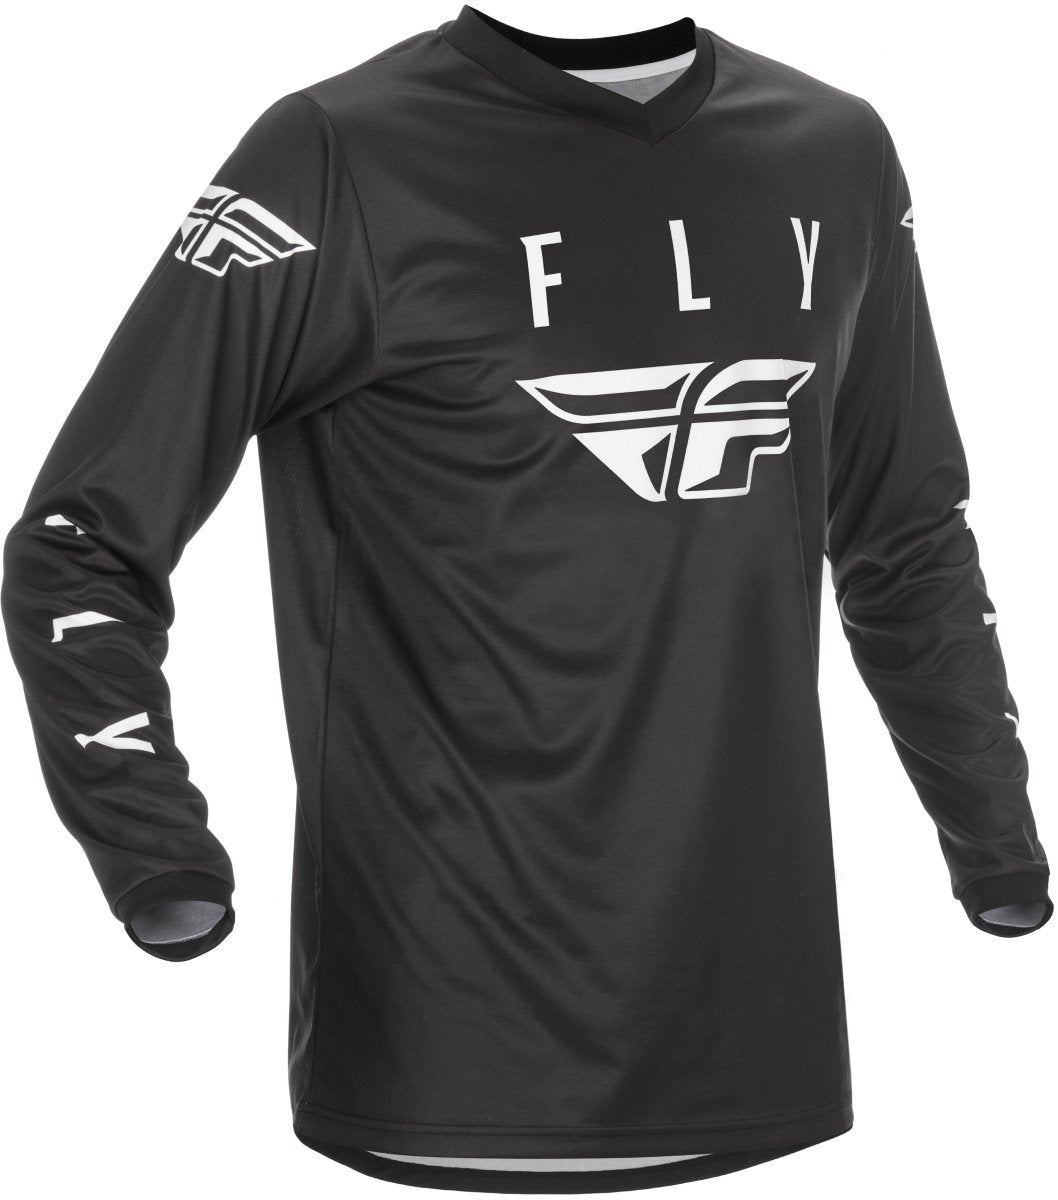 FLY RACING - FLY UNIVERSAL JERSEY - 374-9912X - 191361248337